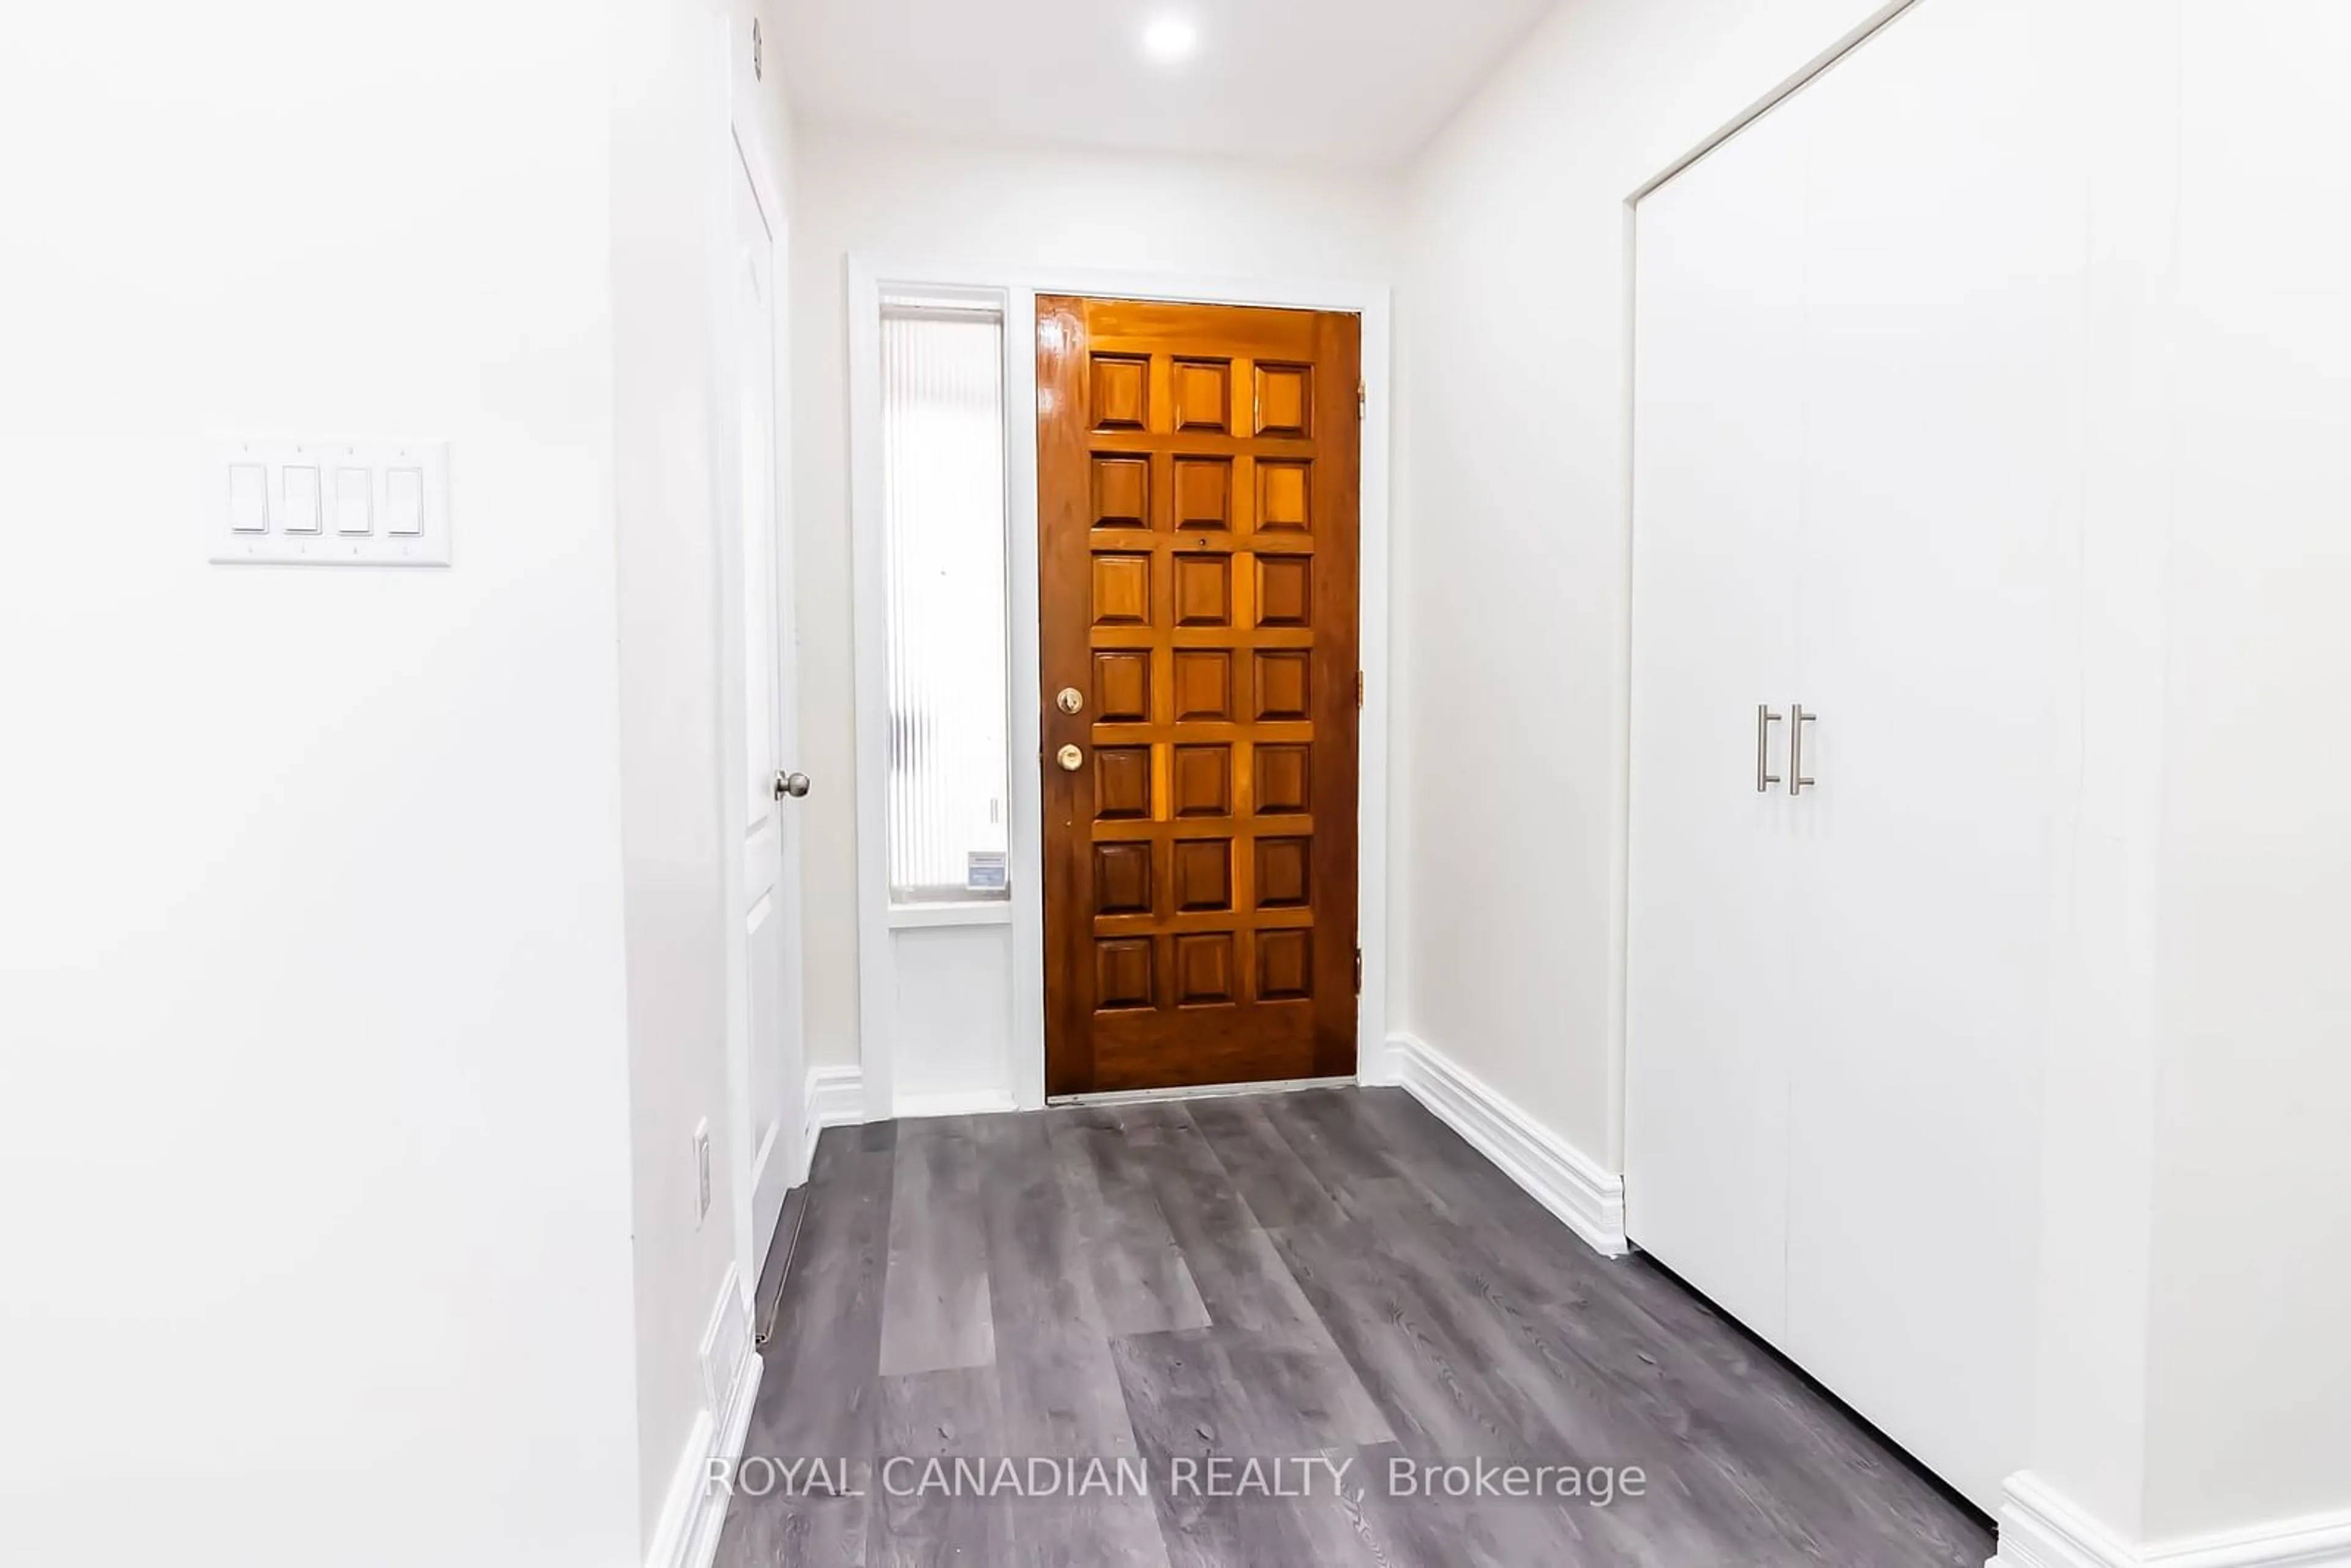 Indoor entryway for 20 Kitson Dr, Toronto Ontario M1M 3C8